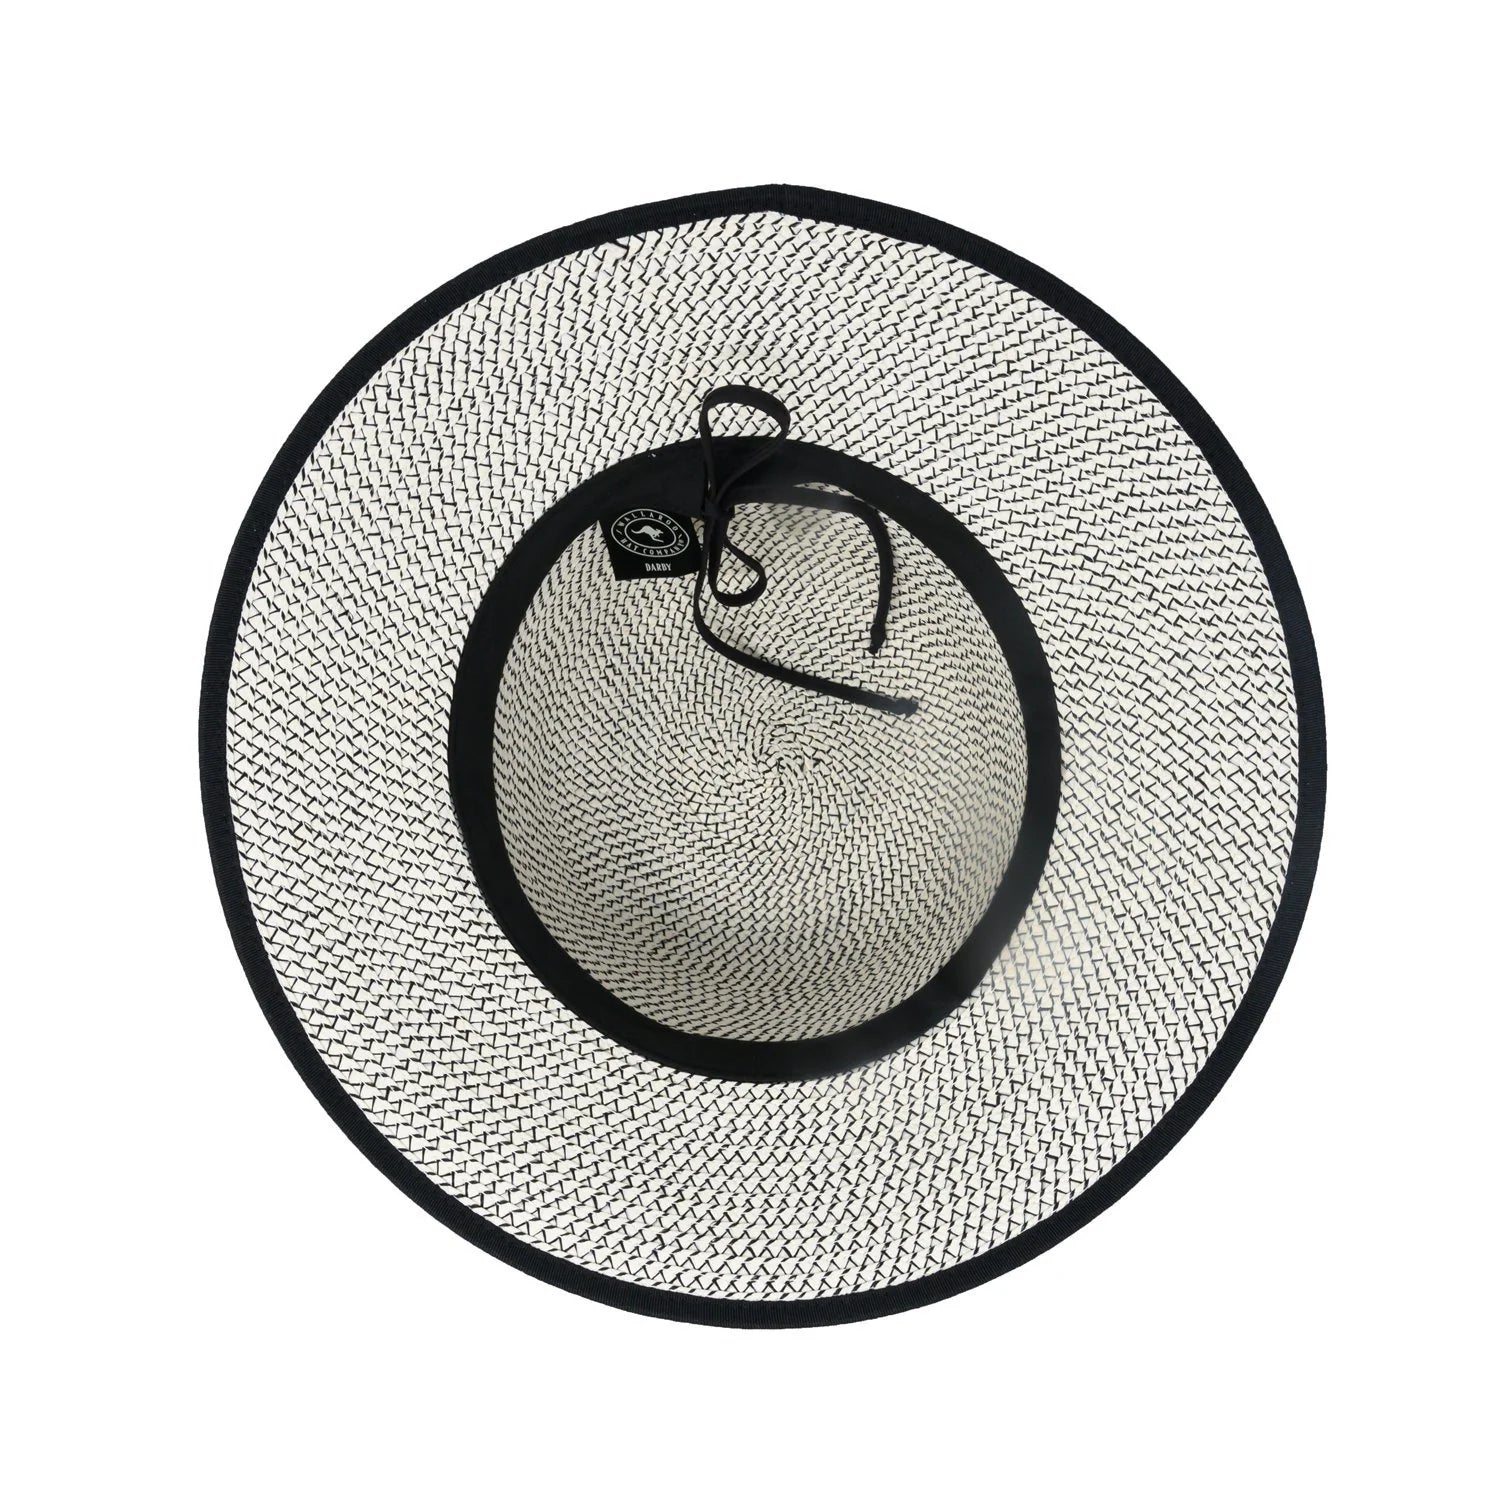 This women's cloche sun hat is an elegant twist on a vintage design with modern flair. The clean lines and neutral tones of the Darby hat elevate your look for shopping with friends or walking barefoot on the beach. Sun protected and timeless.